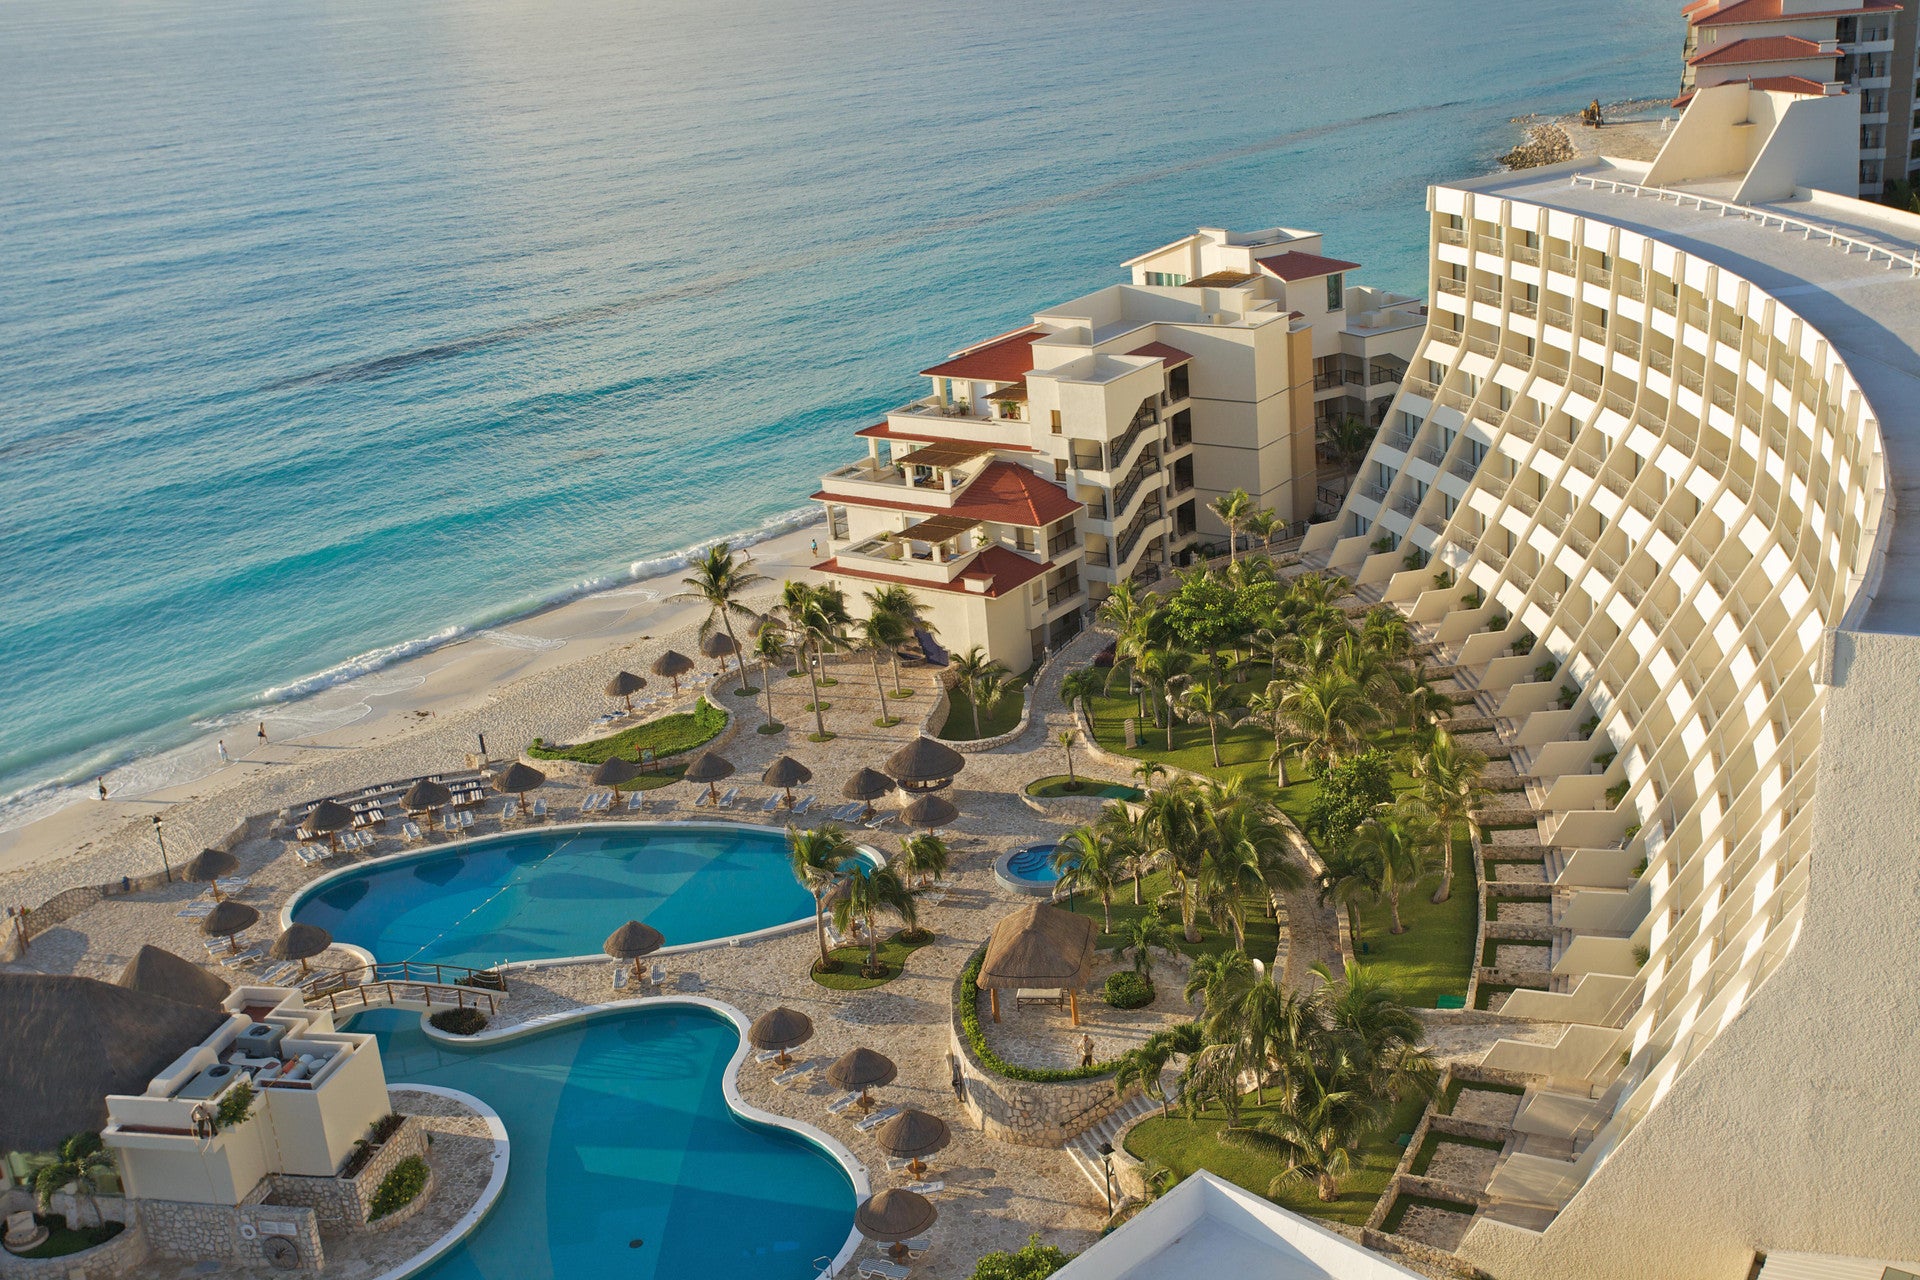 Grand Park Royal Luxury Resort Cancun in Cancun, Mexico | Holidays from